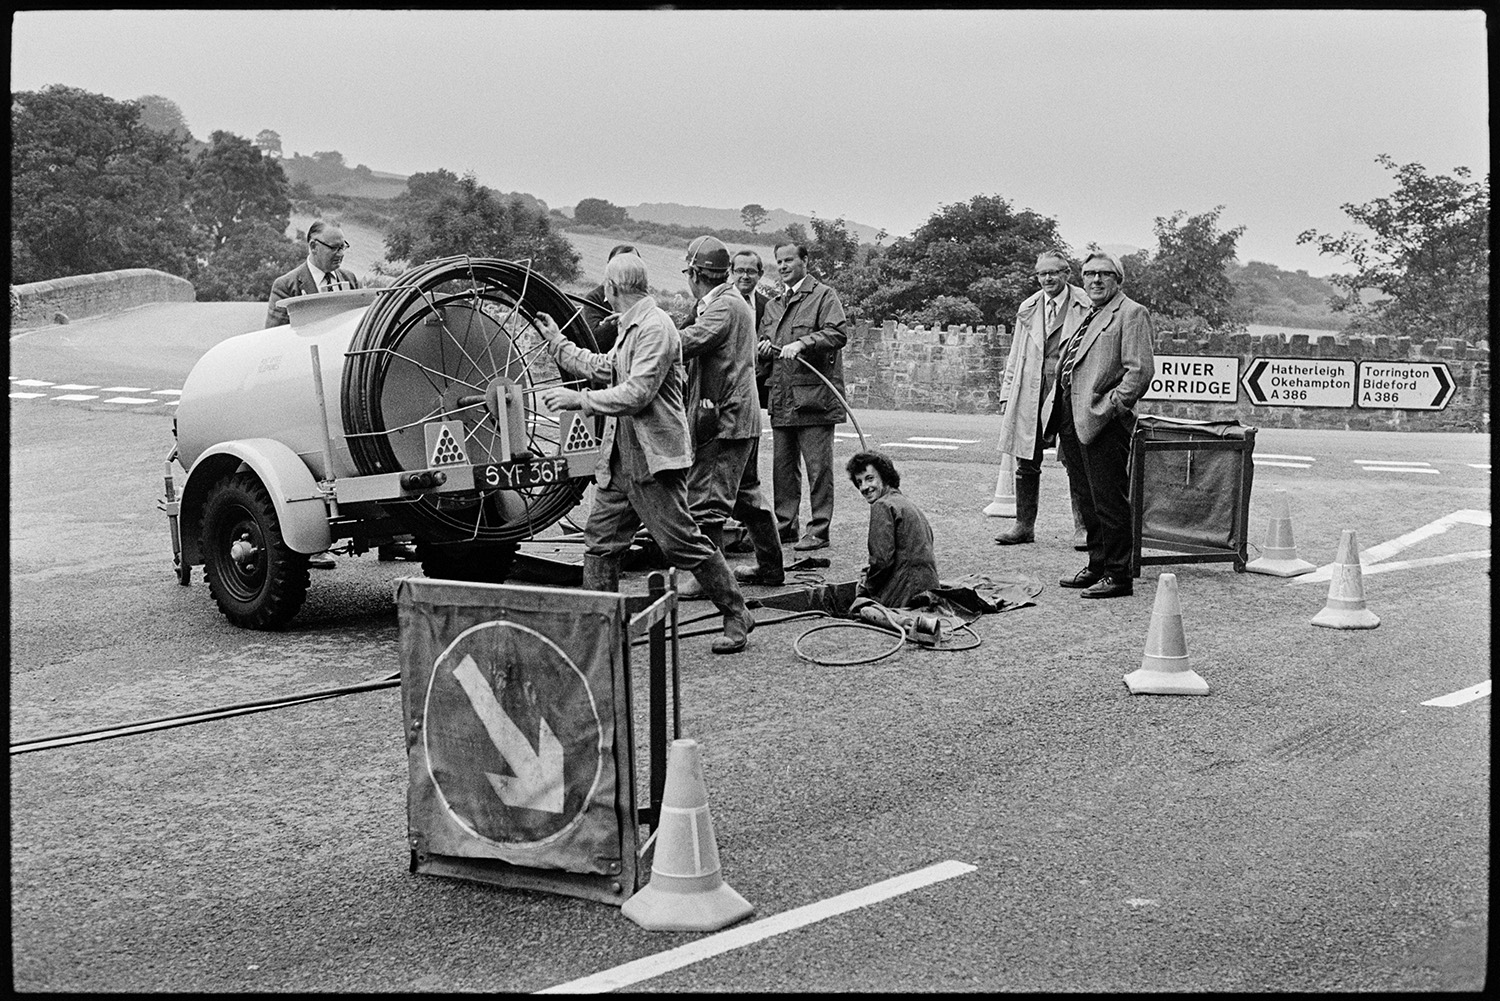 Officials from Electricity Board testing new equipment. 
[Men watching workmen from the Electricity Board test new equipment under a manhole cover in a road by a bridge in Torrington.]